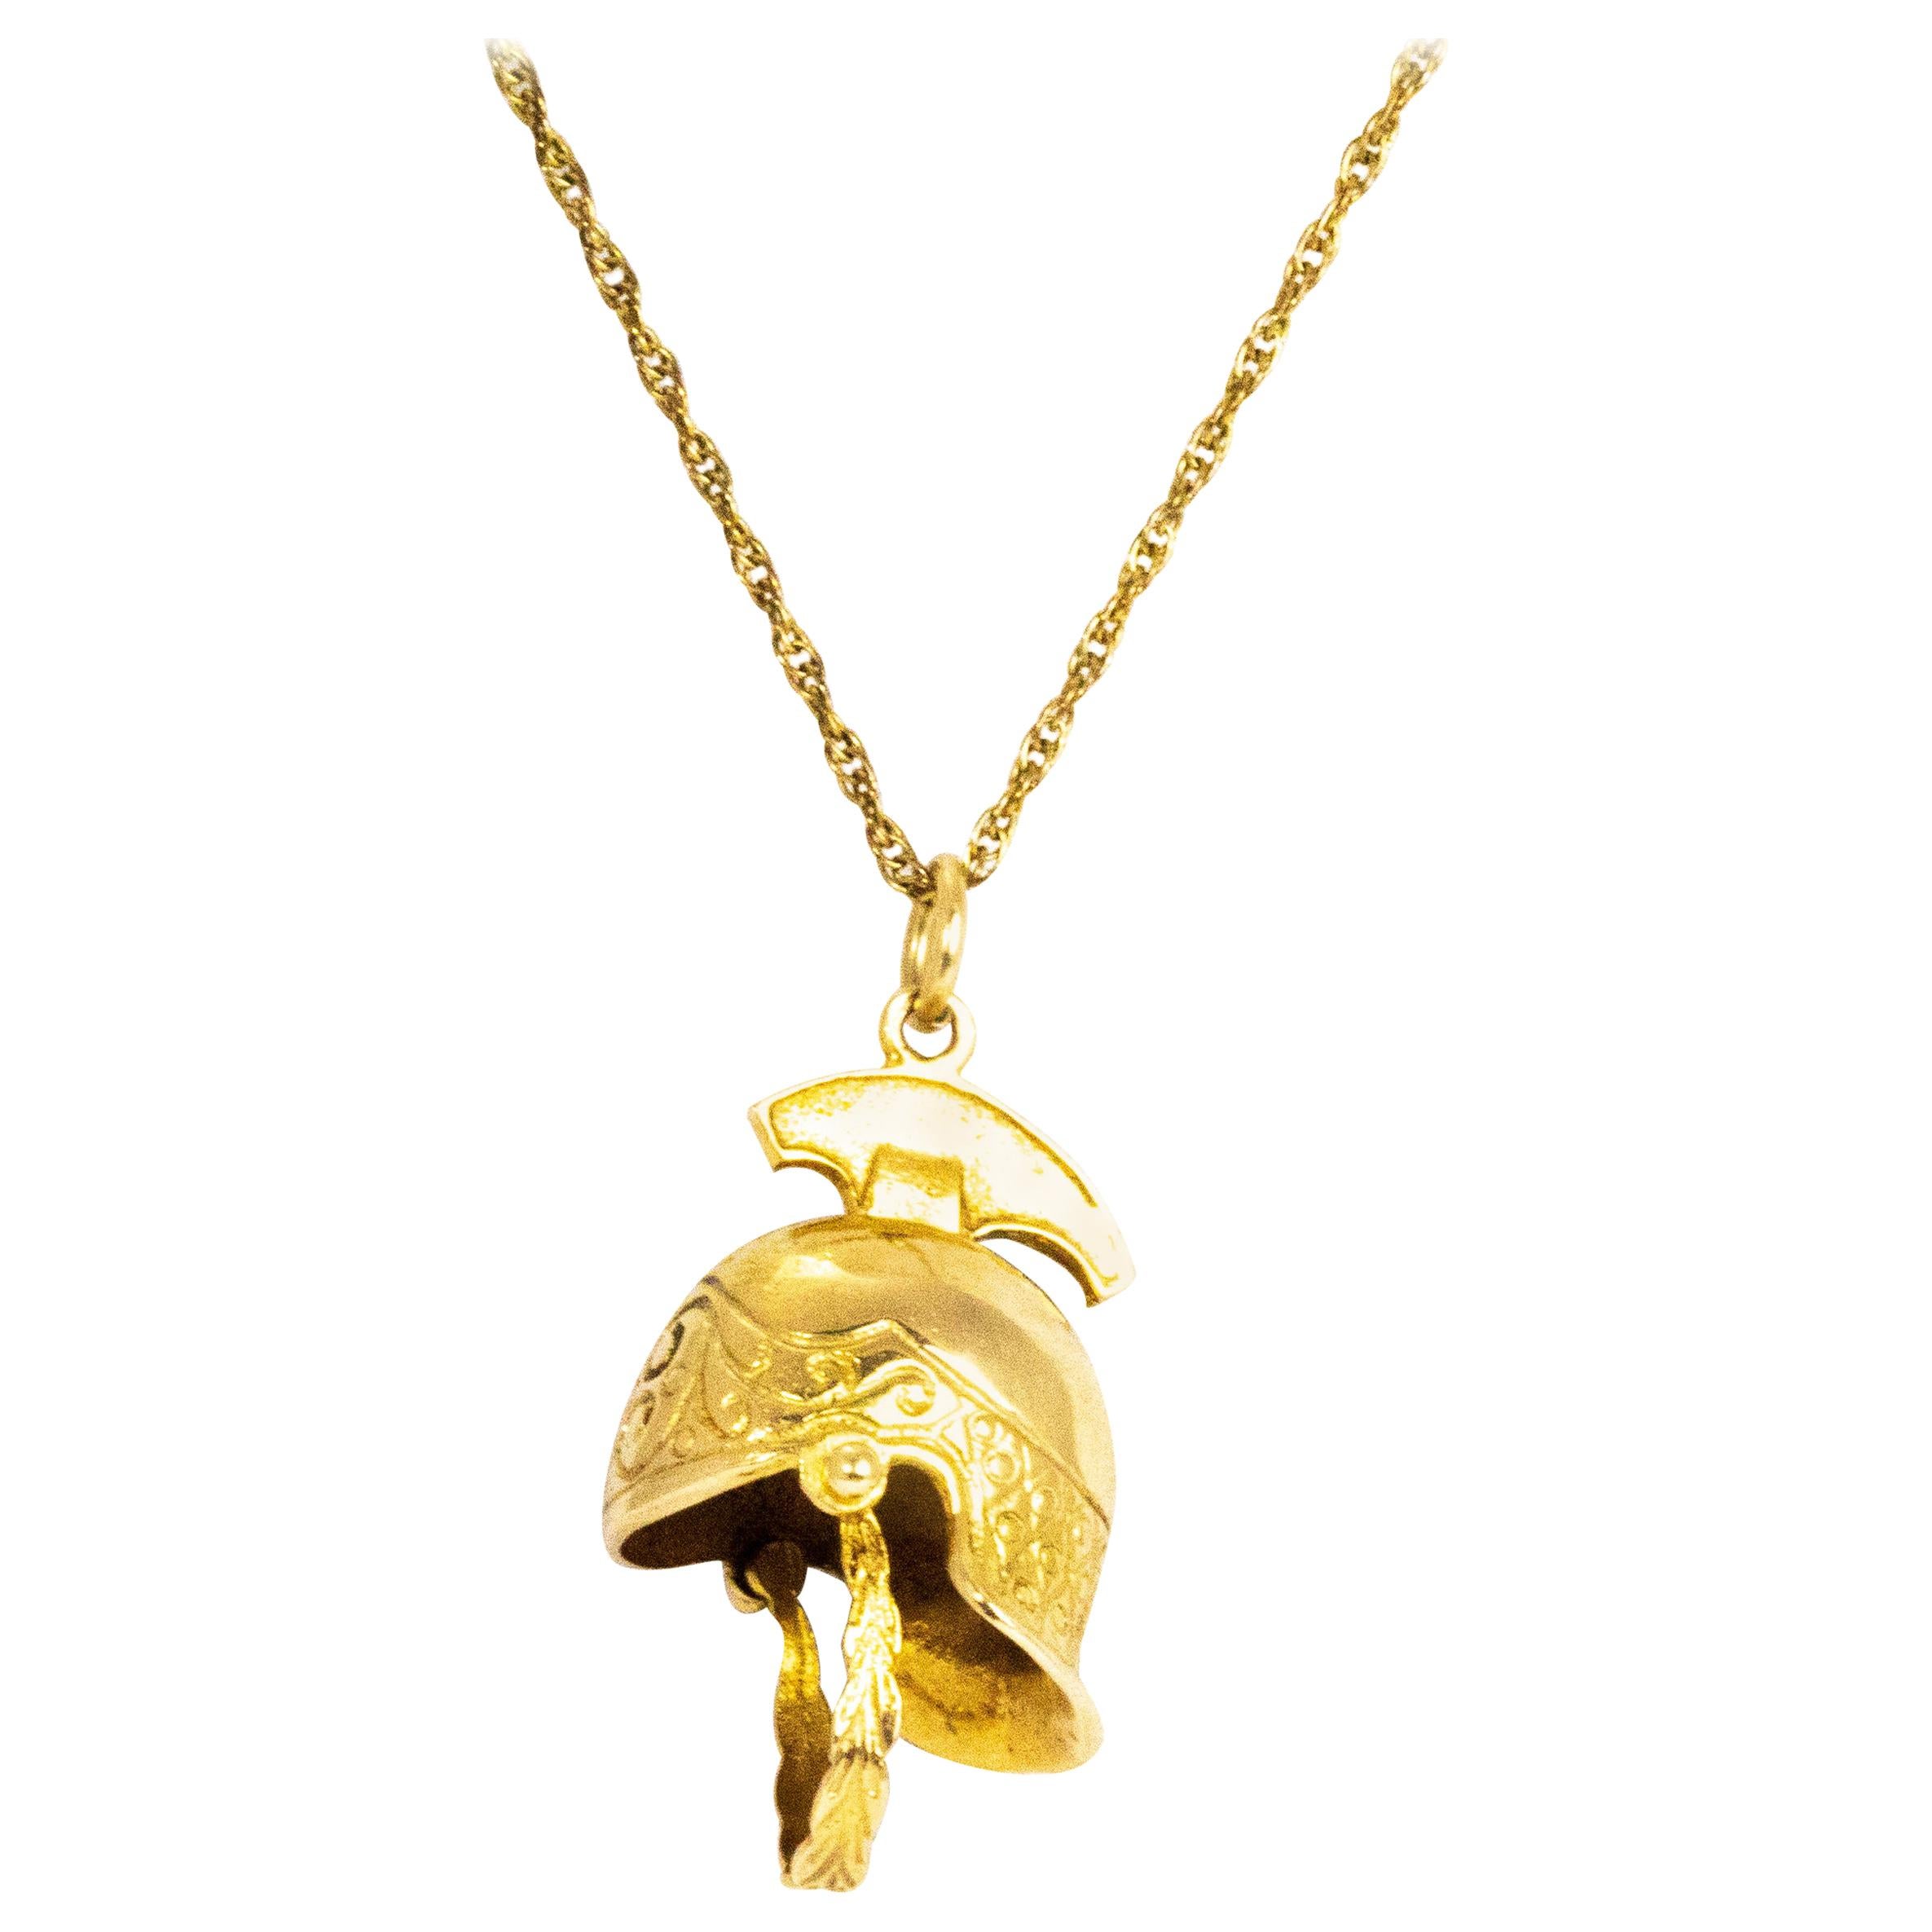 Vintage Yellow Gold Helmet Pendant and Chain